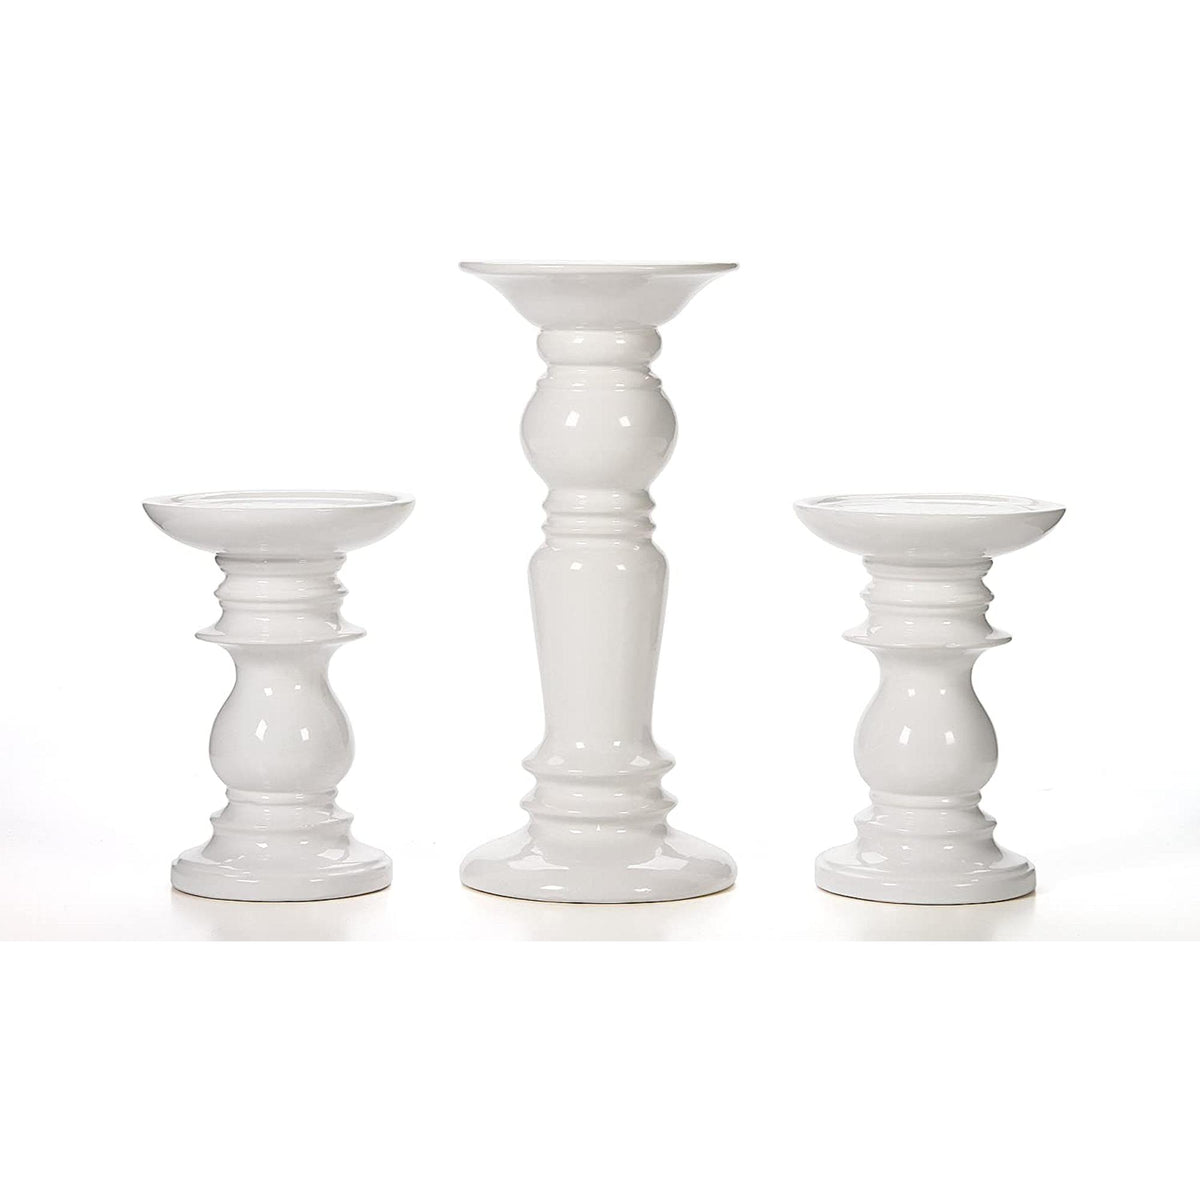 HOSLEY®  Ceramic Pillar Candle Holders, White Glazed, Set of 3, Two 6 inches and One 9.5 inches High